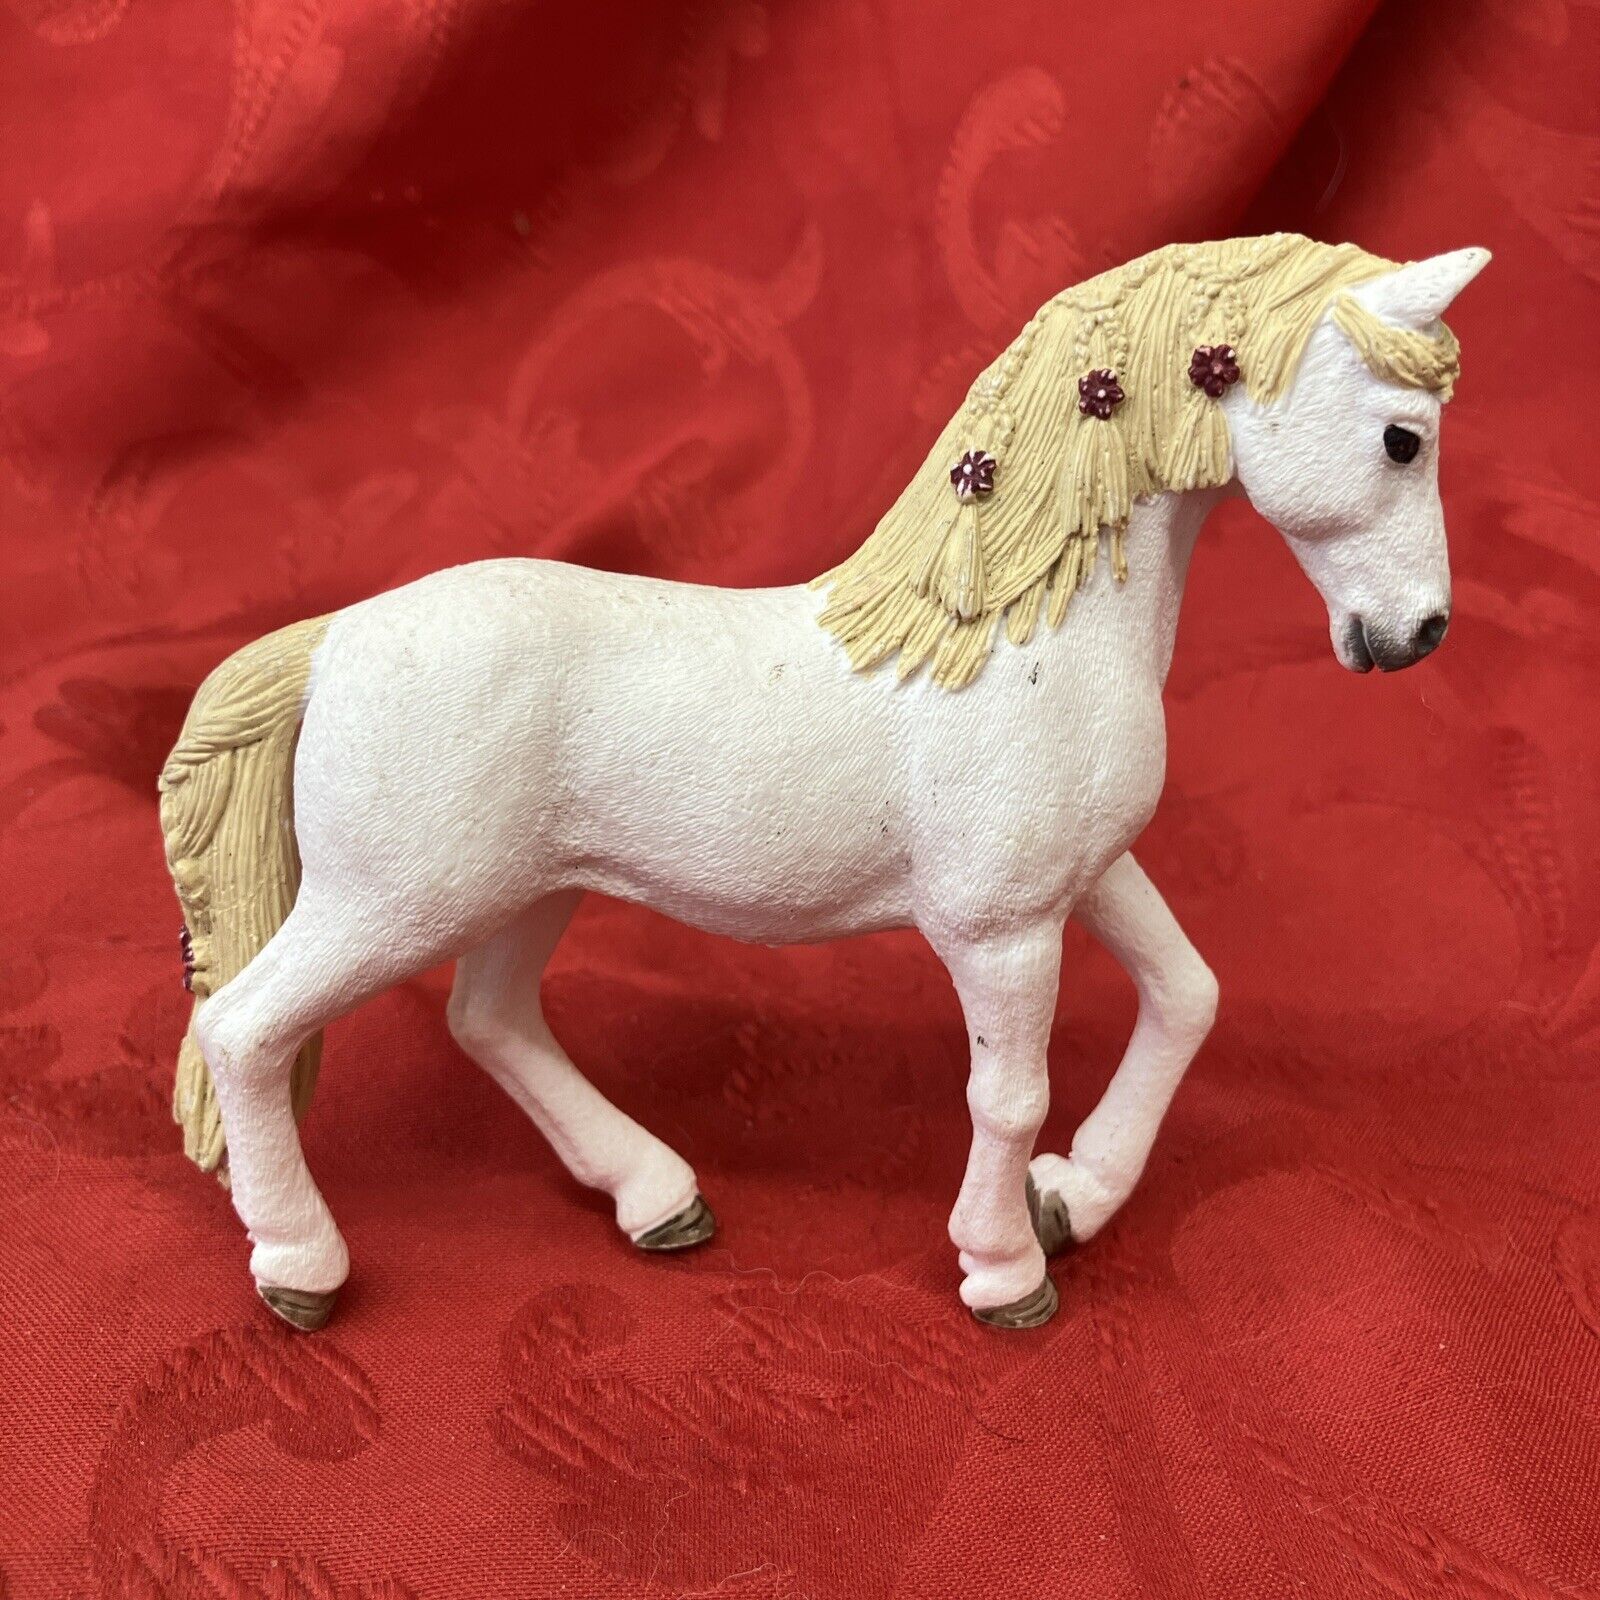 Schleich White ANDALUSIAN MARE 